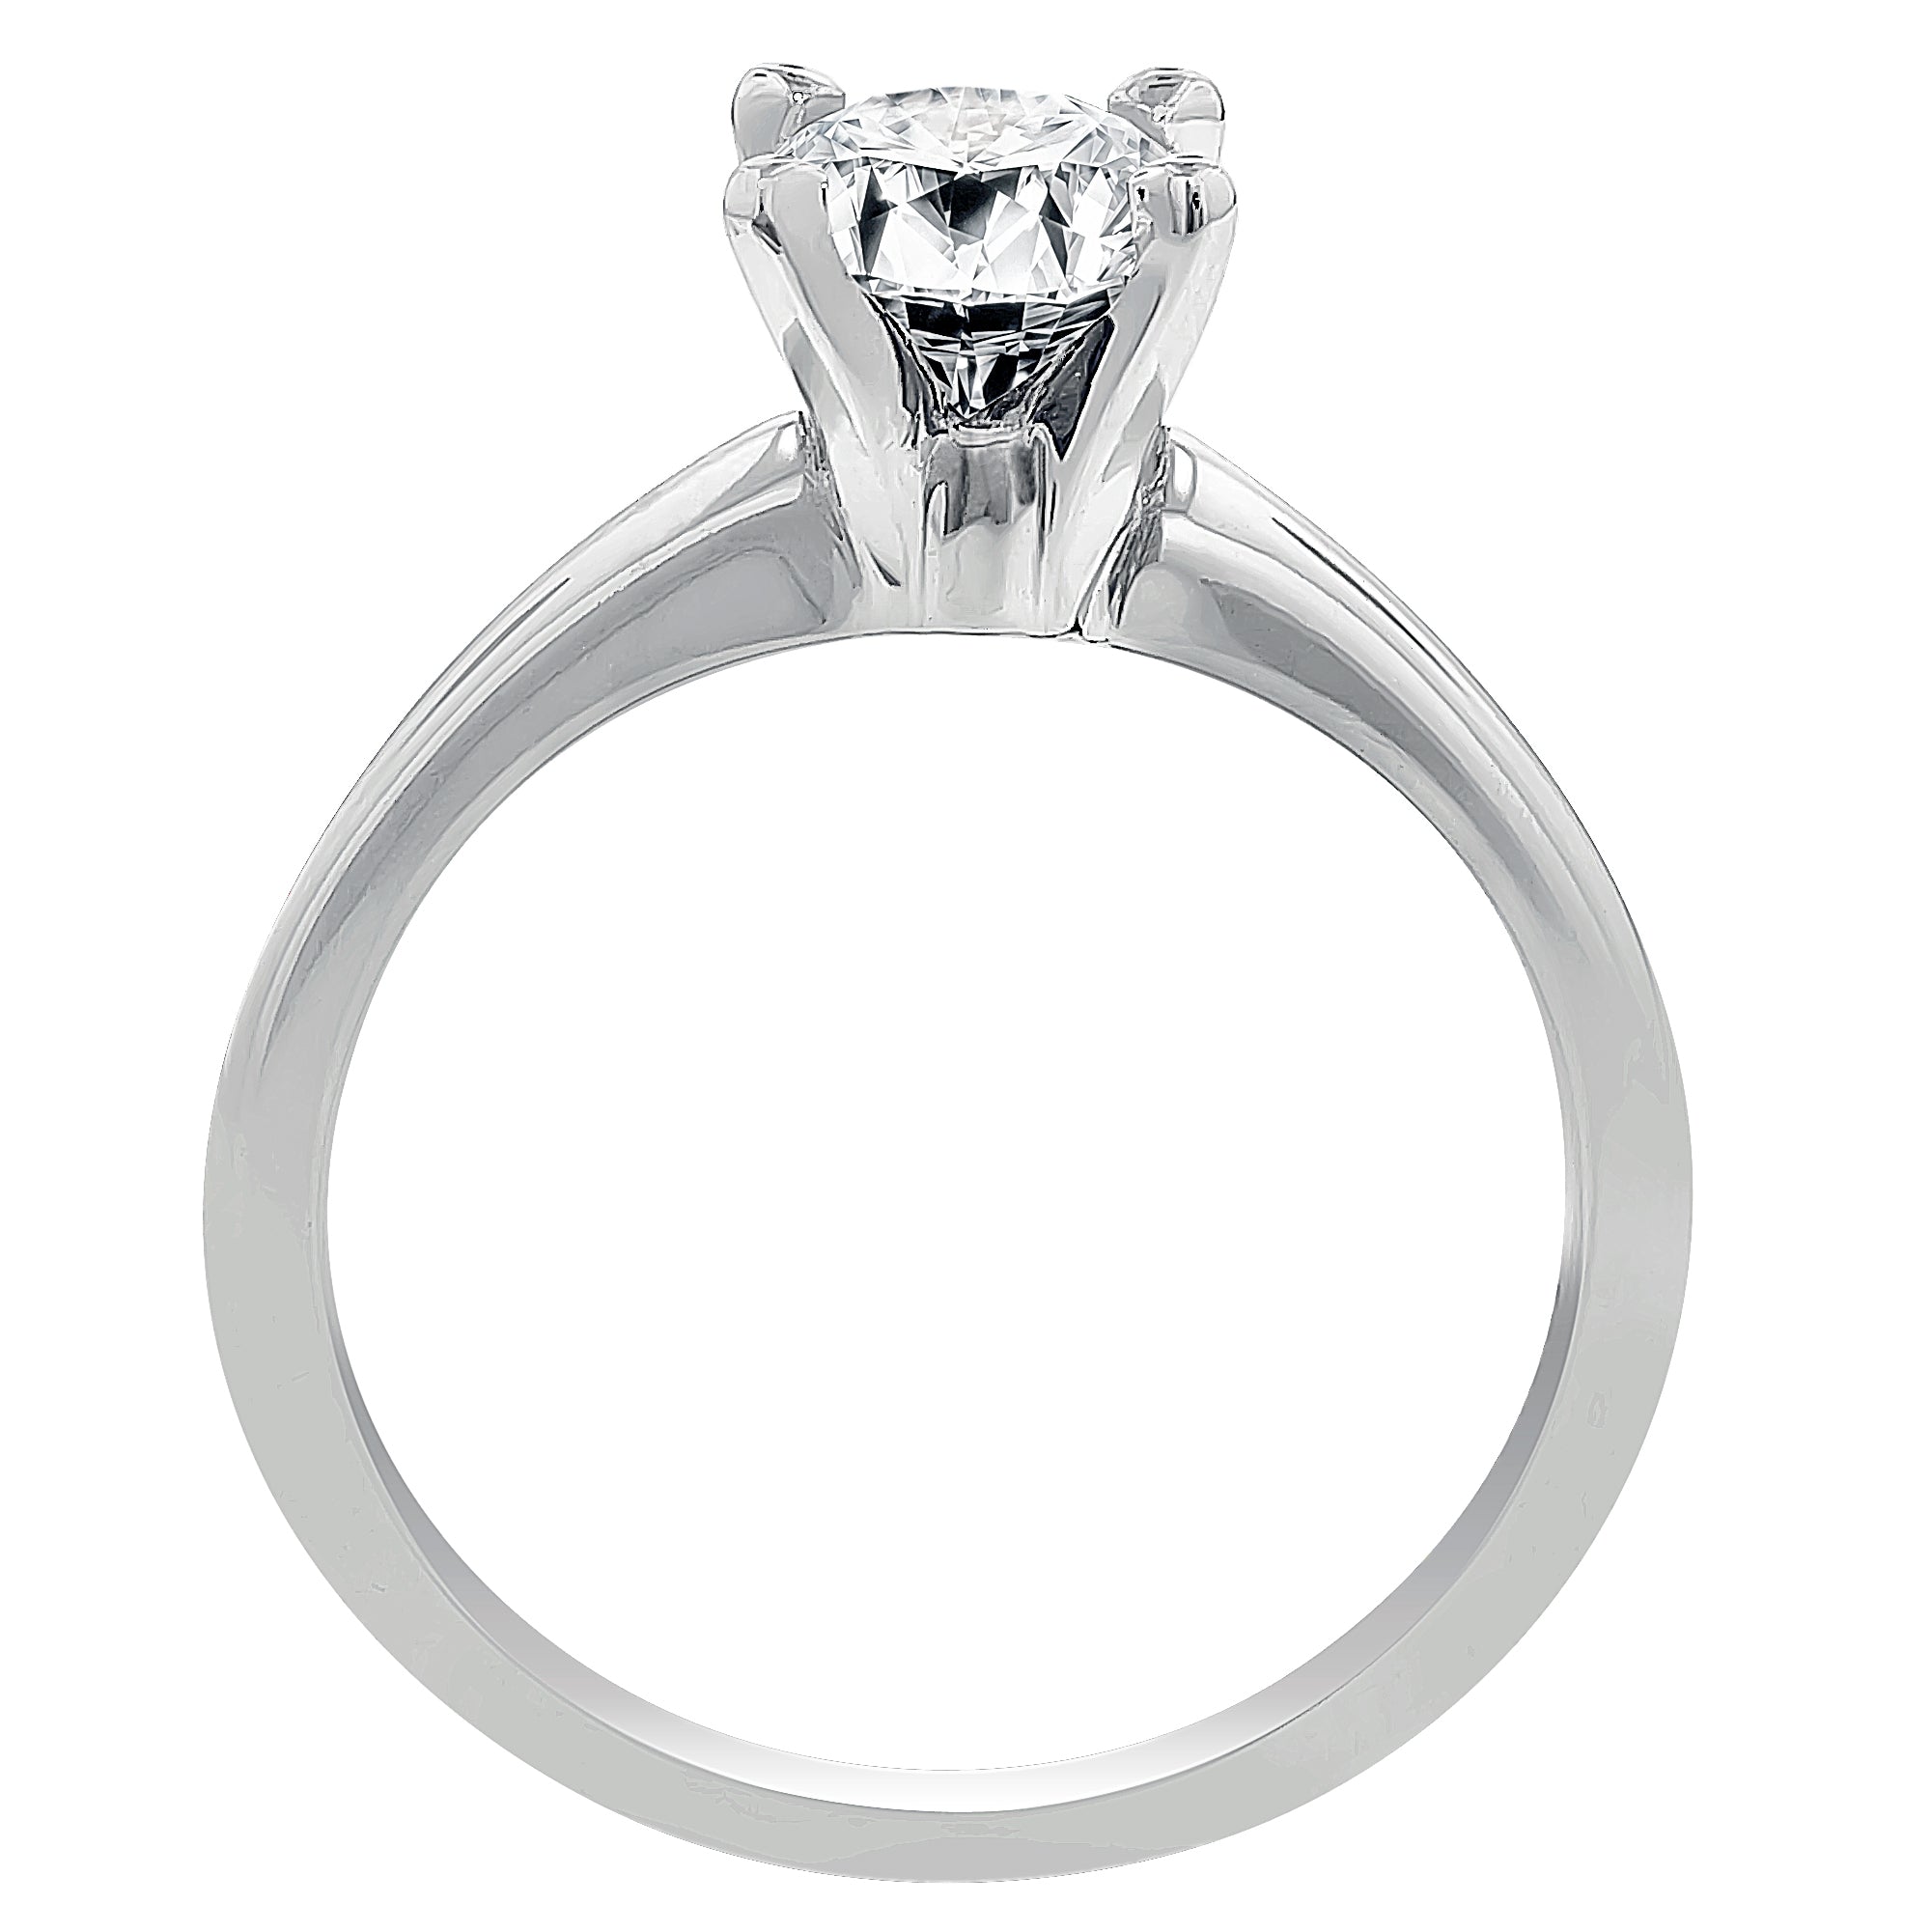 Diamond Solitaire Ring in 14kt White Gold (1 1/4ct)